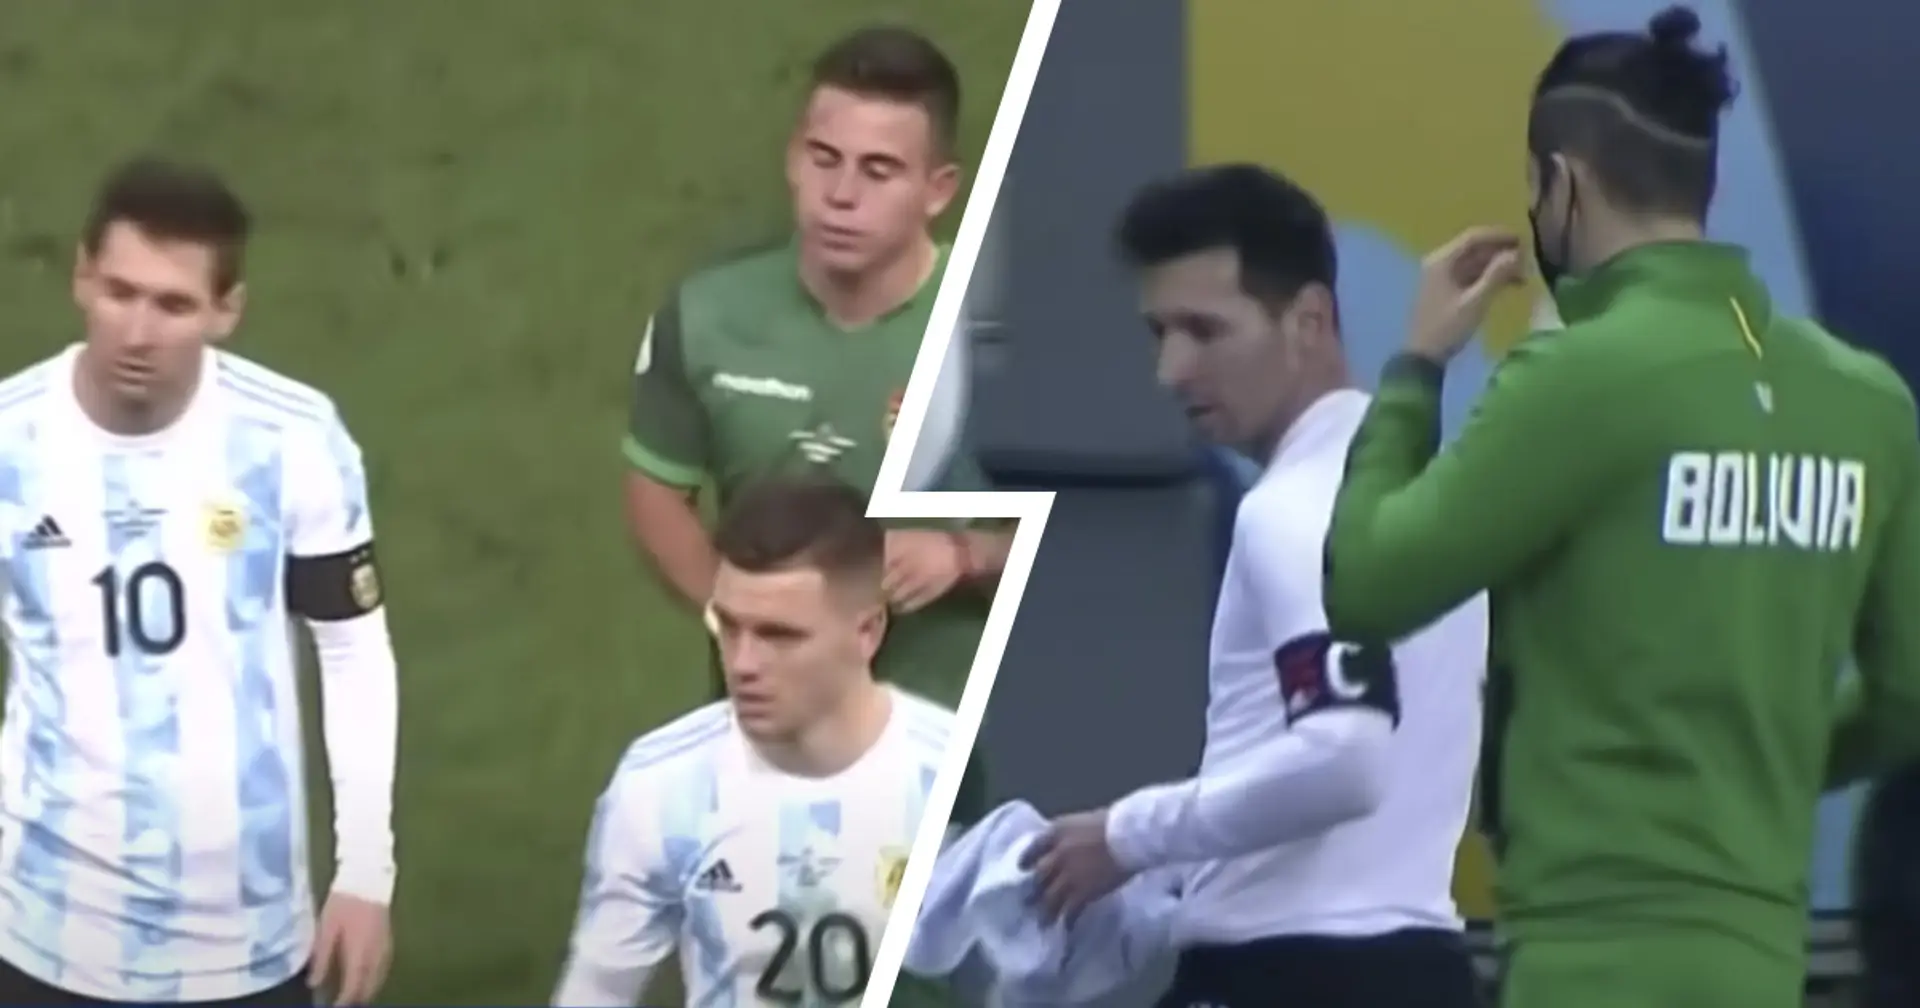 Scenes as 2 Bolivia players ask Messi for shirt swap right on pitch